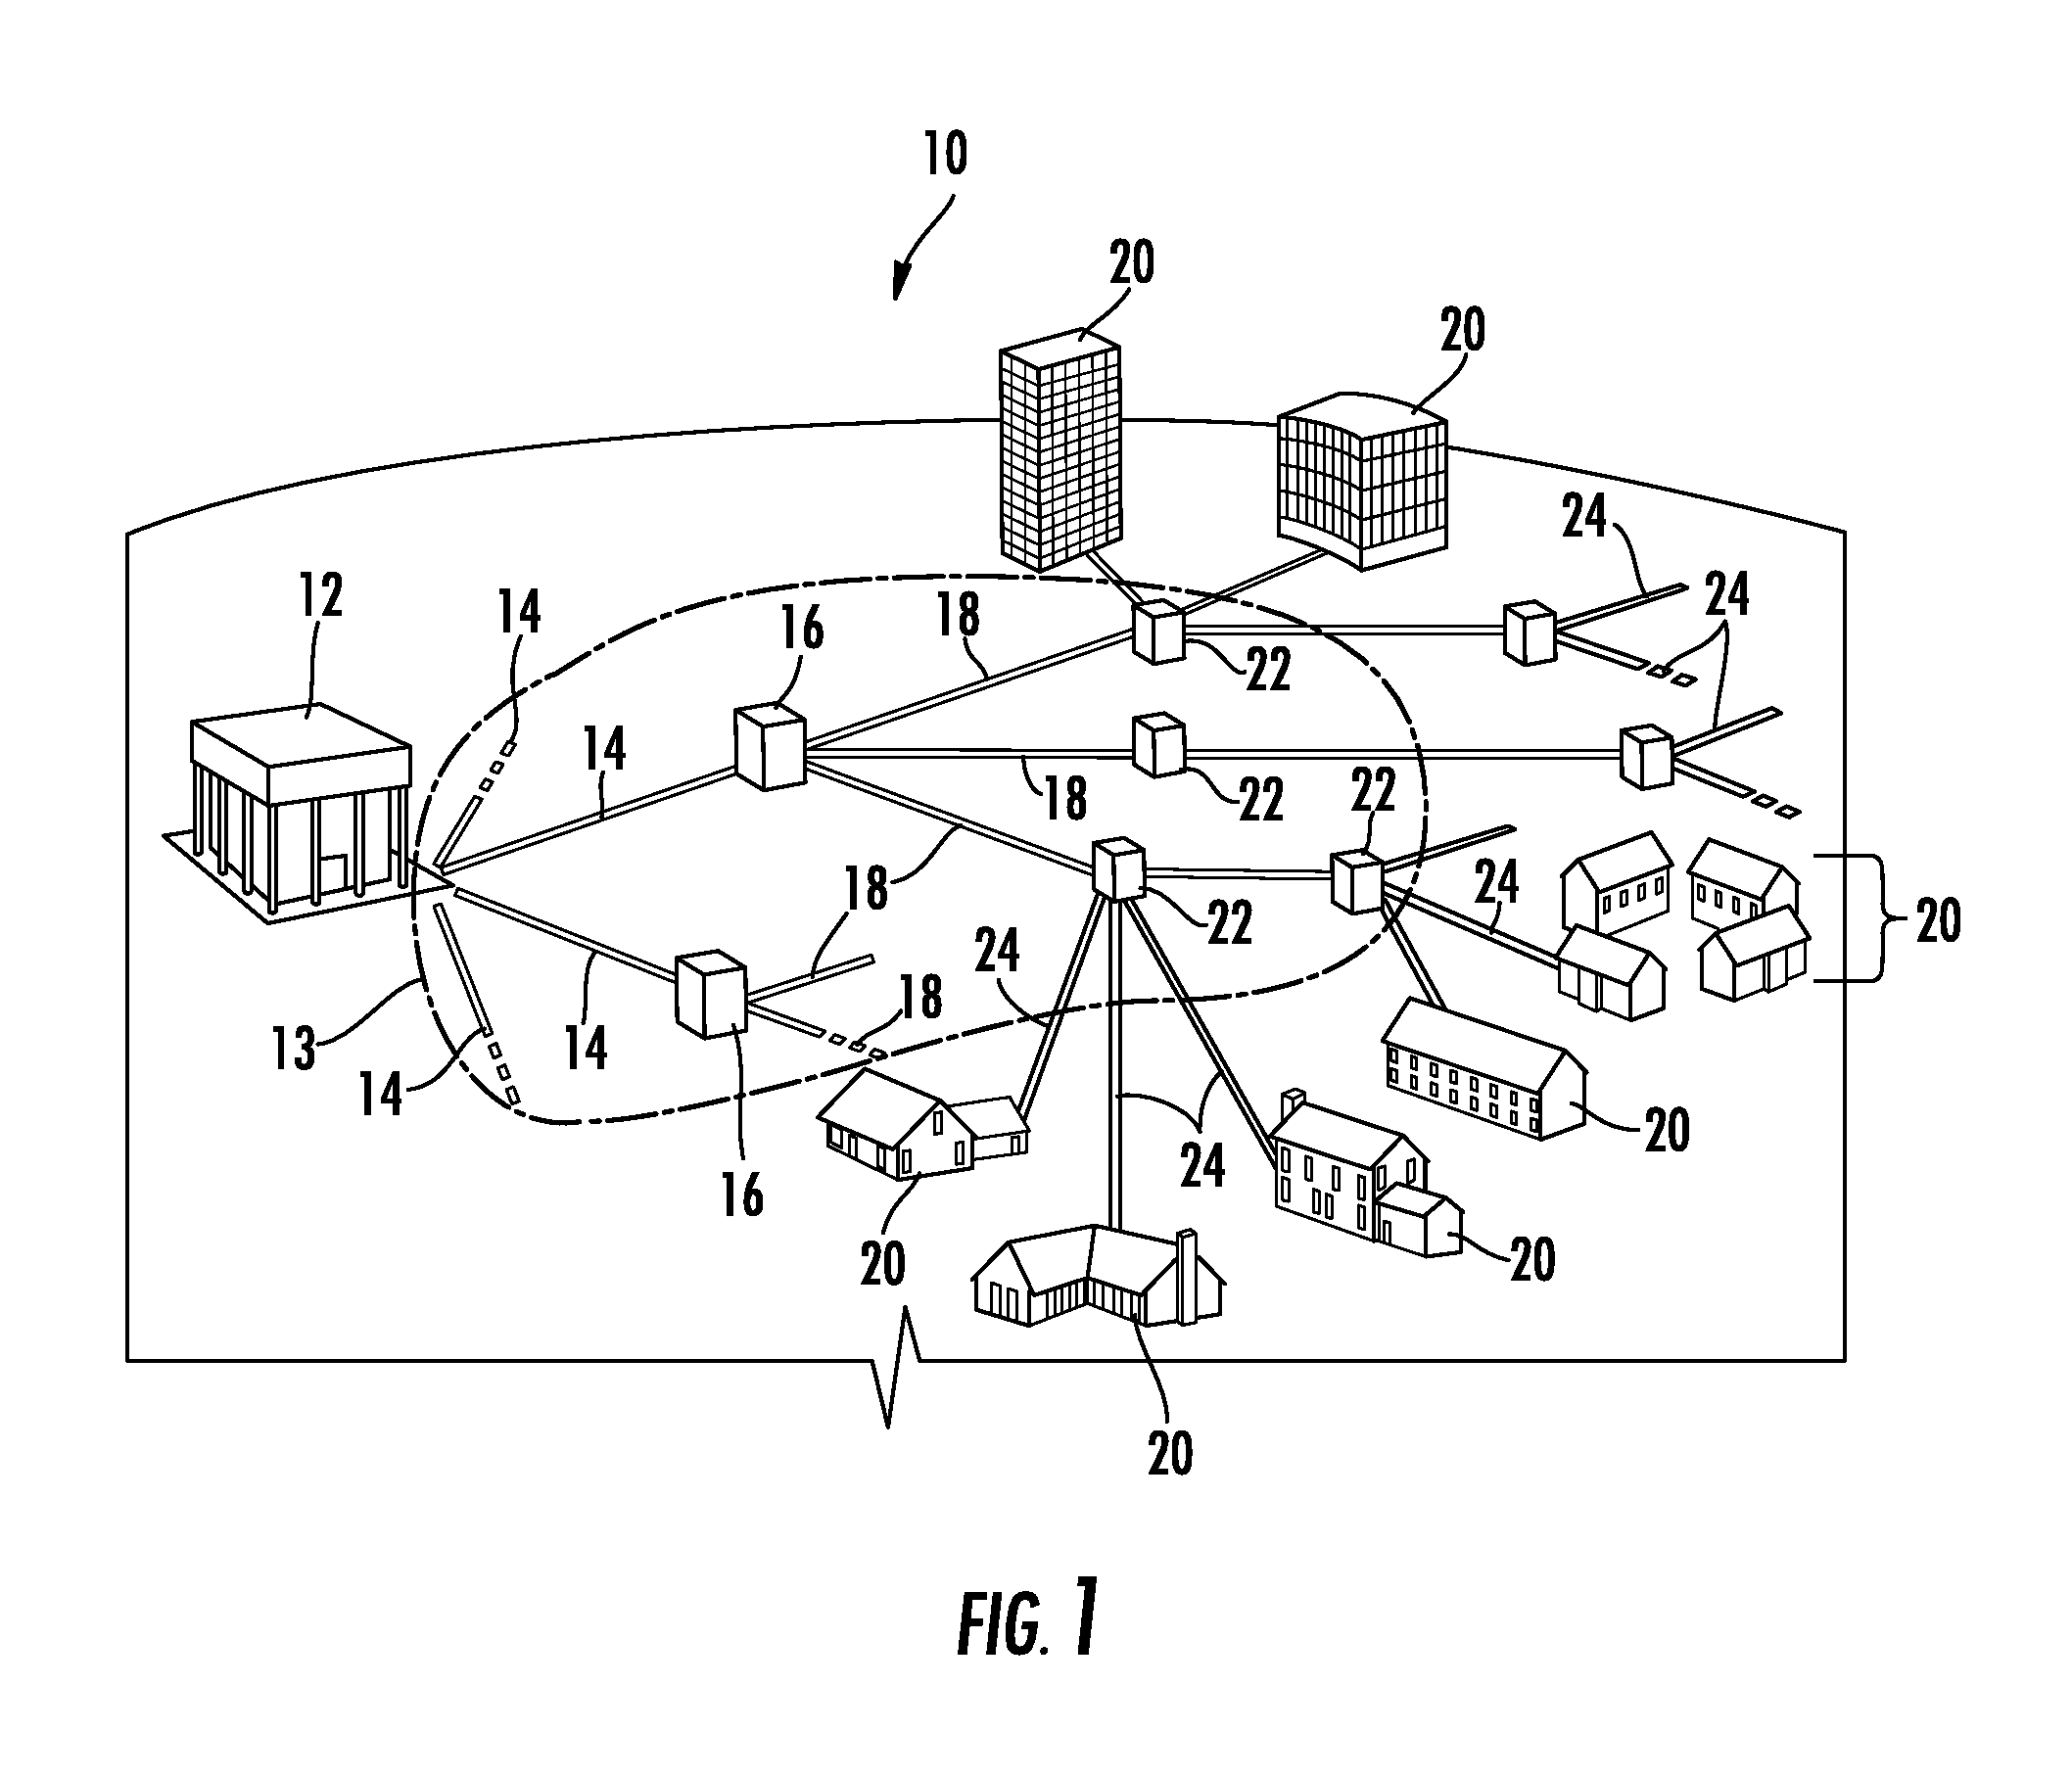 Methods, Apparatuses for Providing Secure Fiber Optic Connections